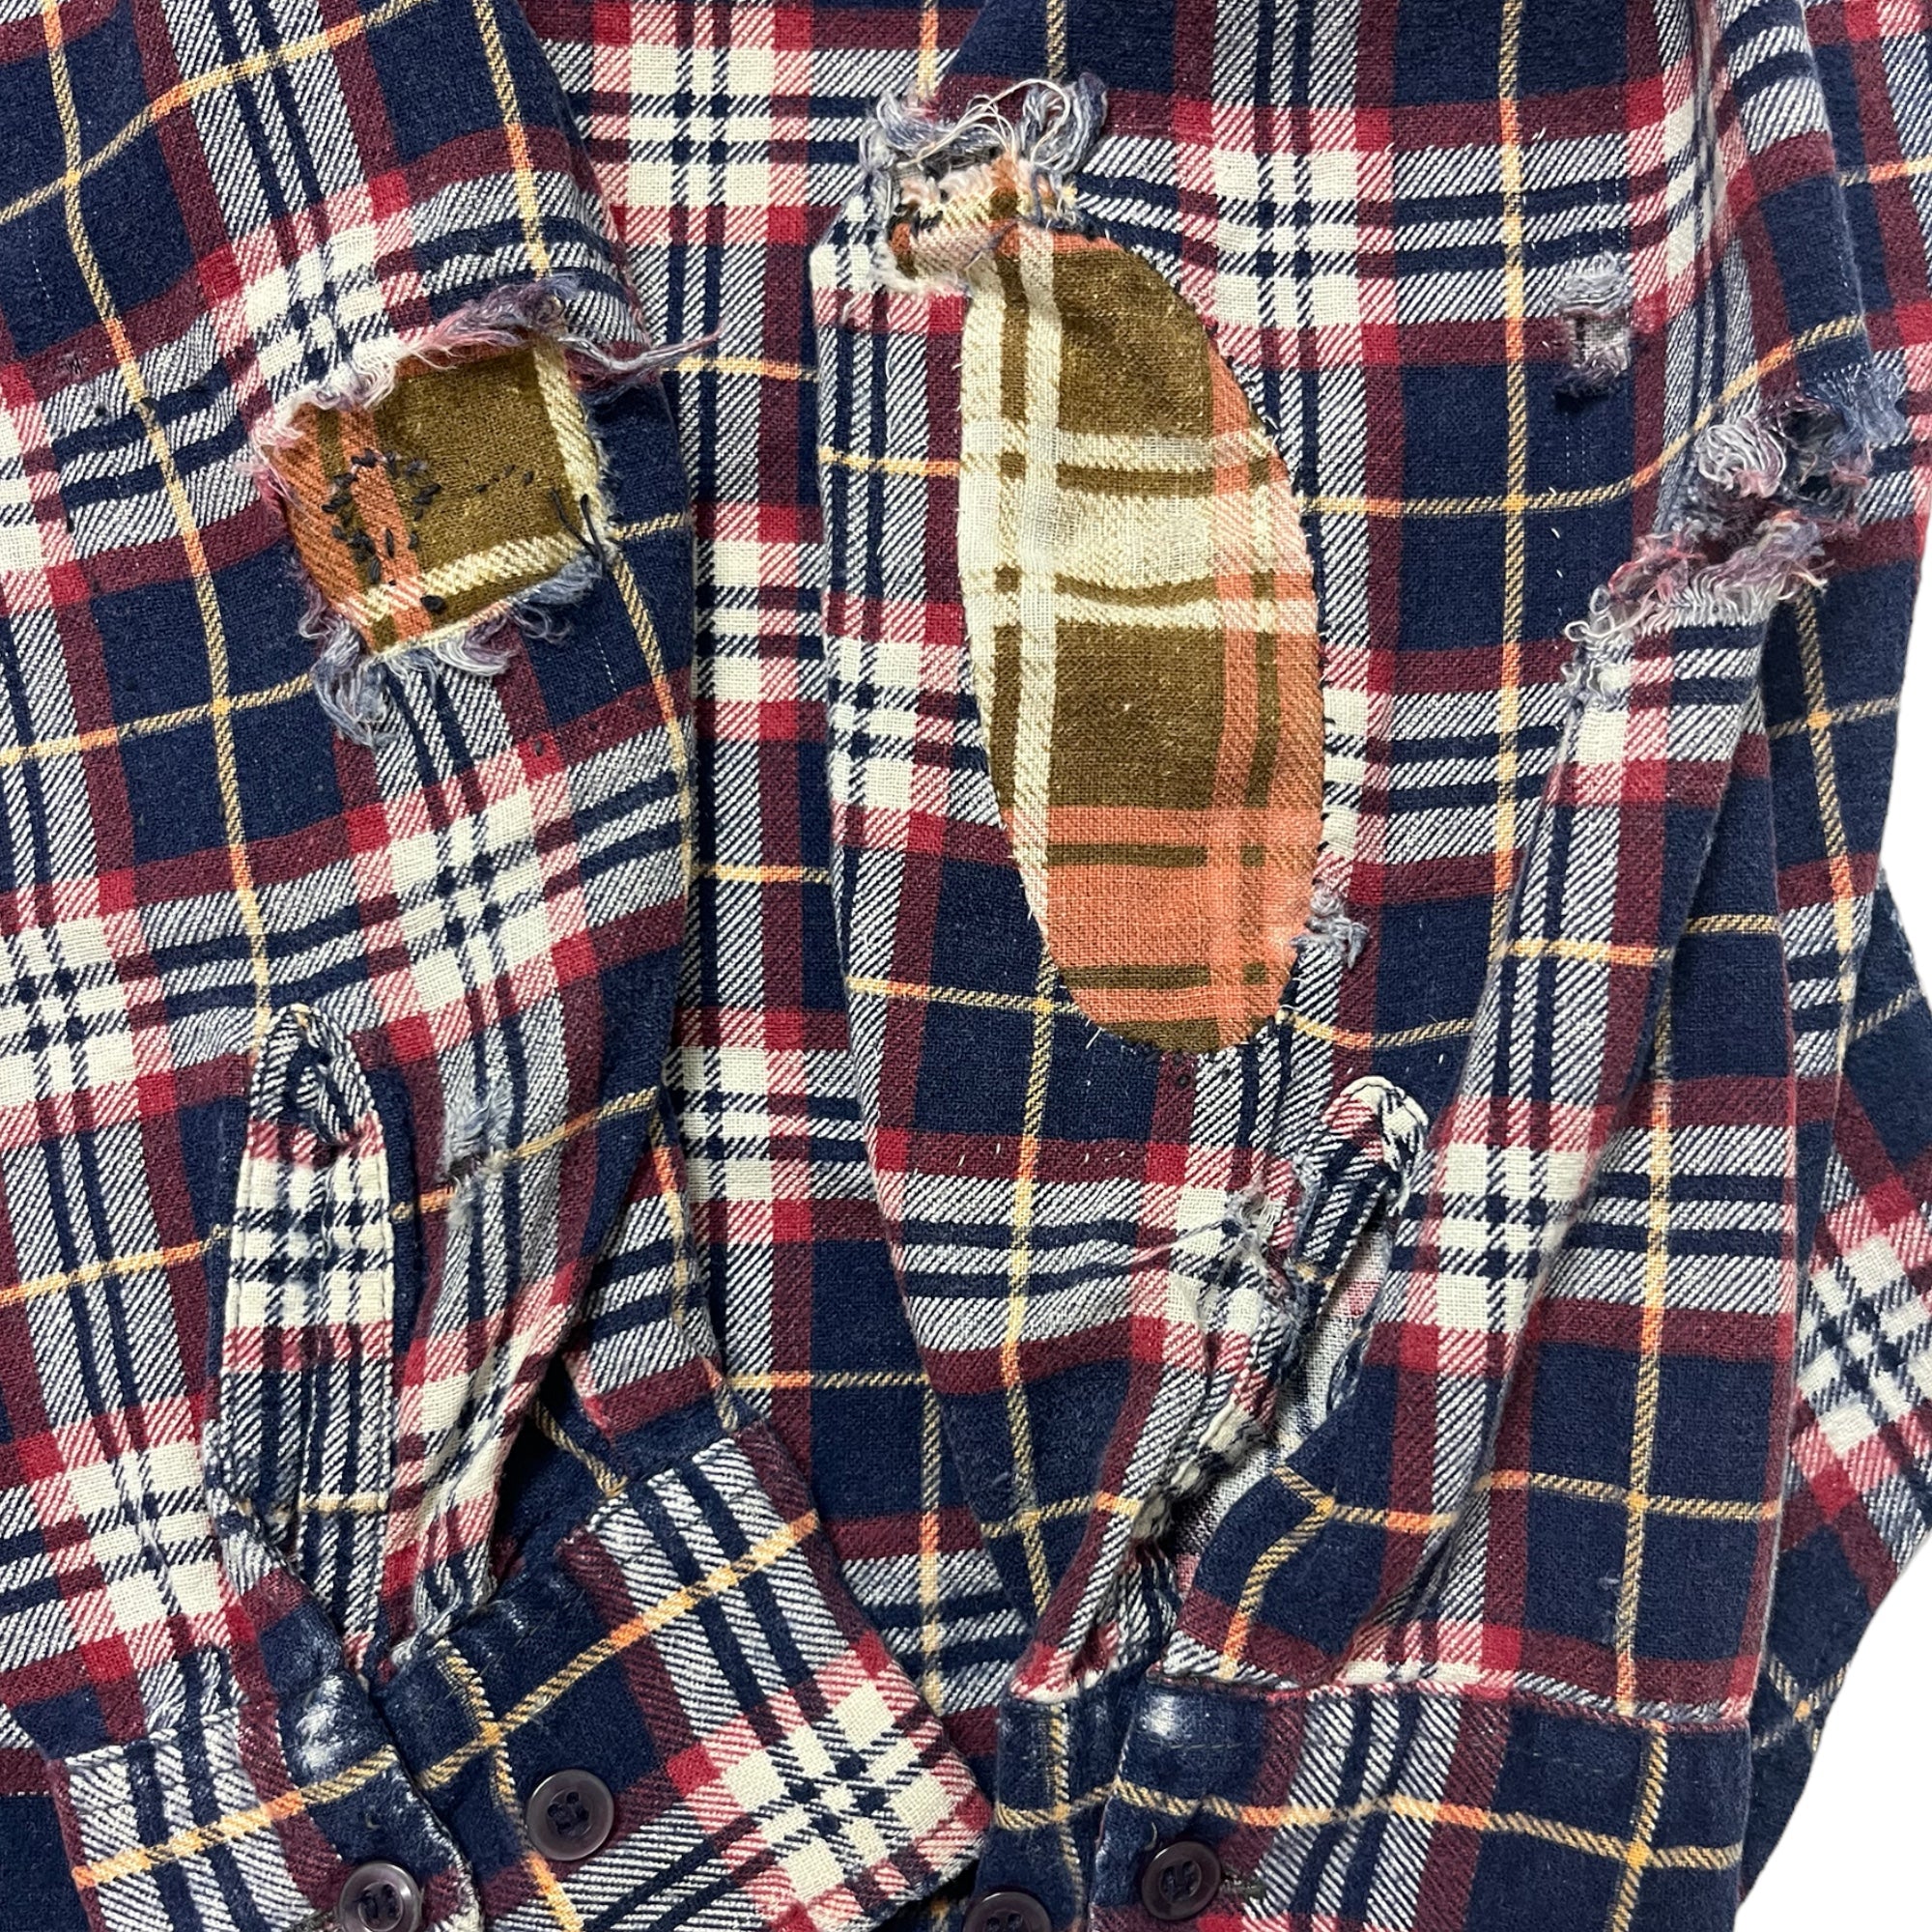 1980s Distressed Flannel with Patches & Repairs - Navy/Red - M/L